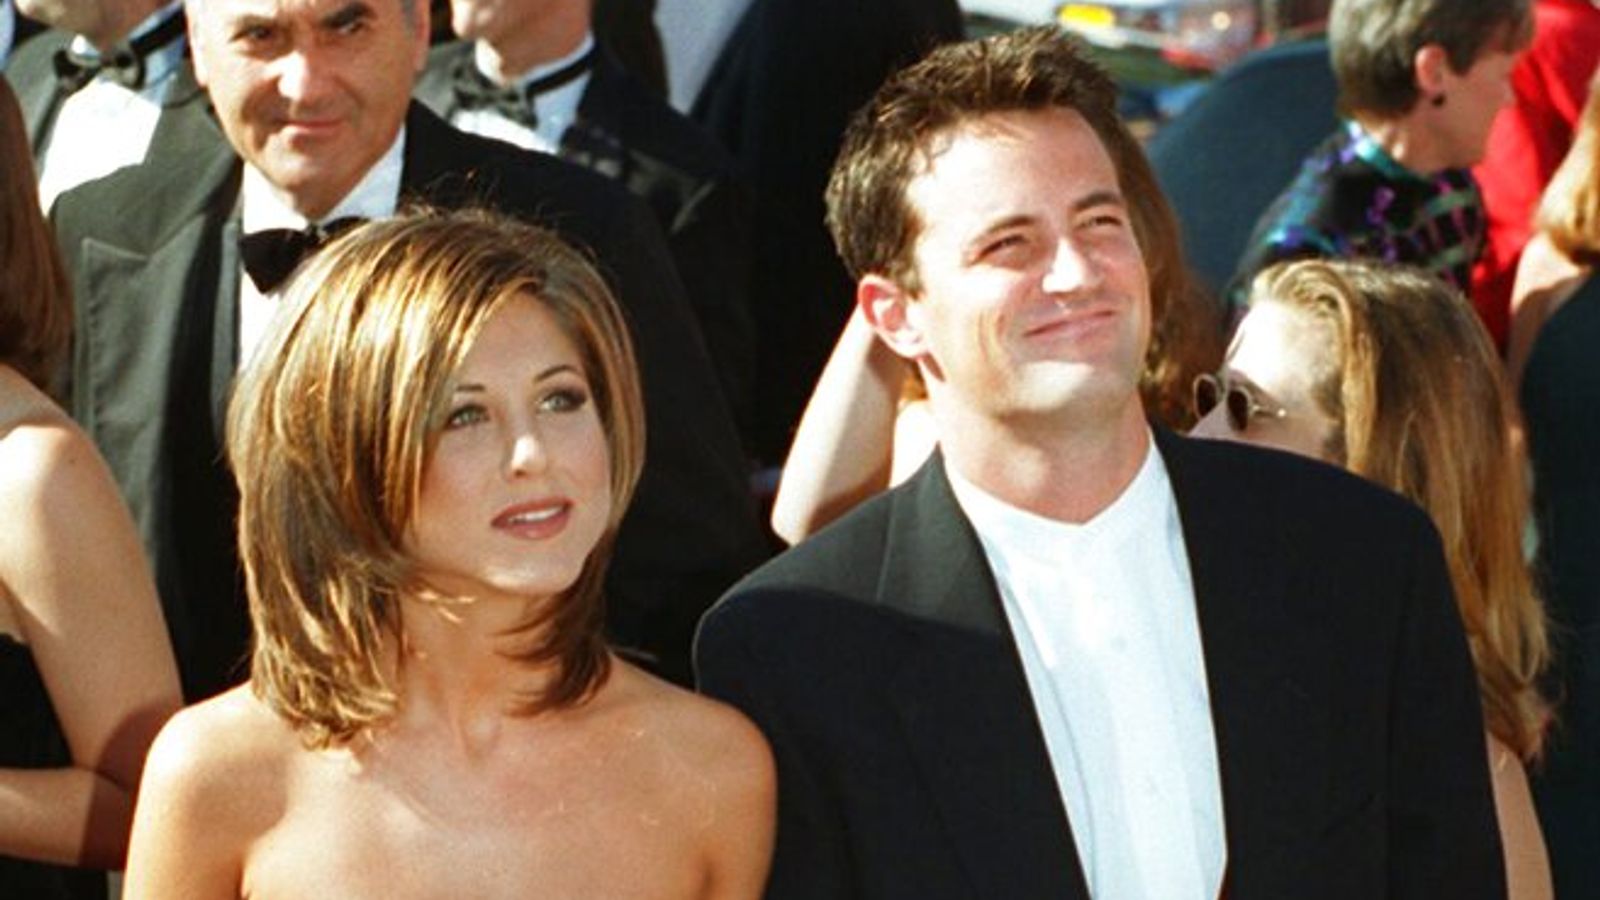 Jennifer Aniston Shares Text From Matthew Perry As She And David Schwimmer Post Tributes To